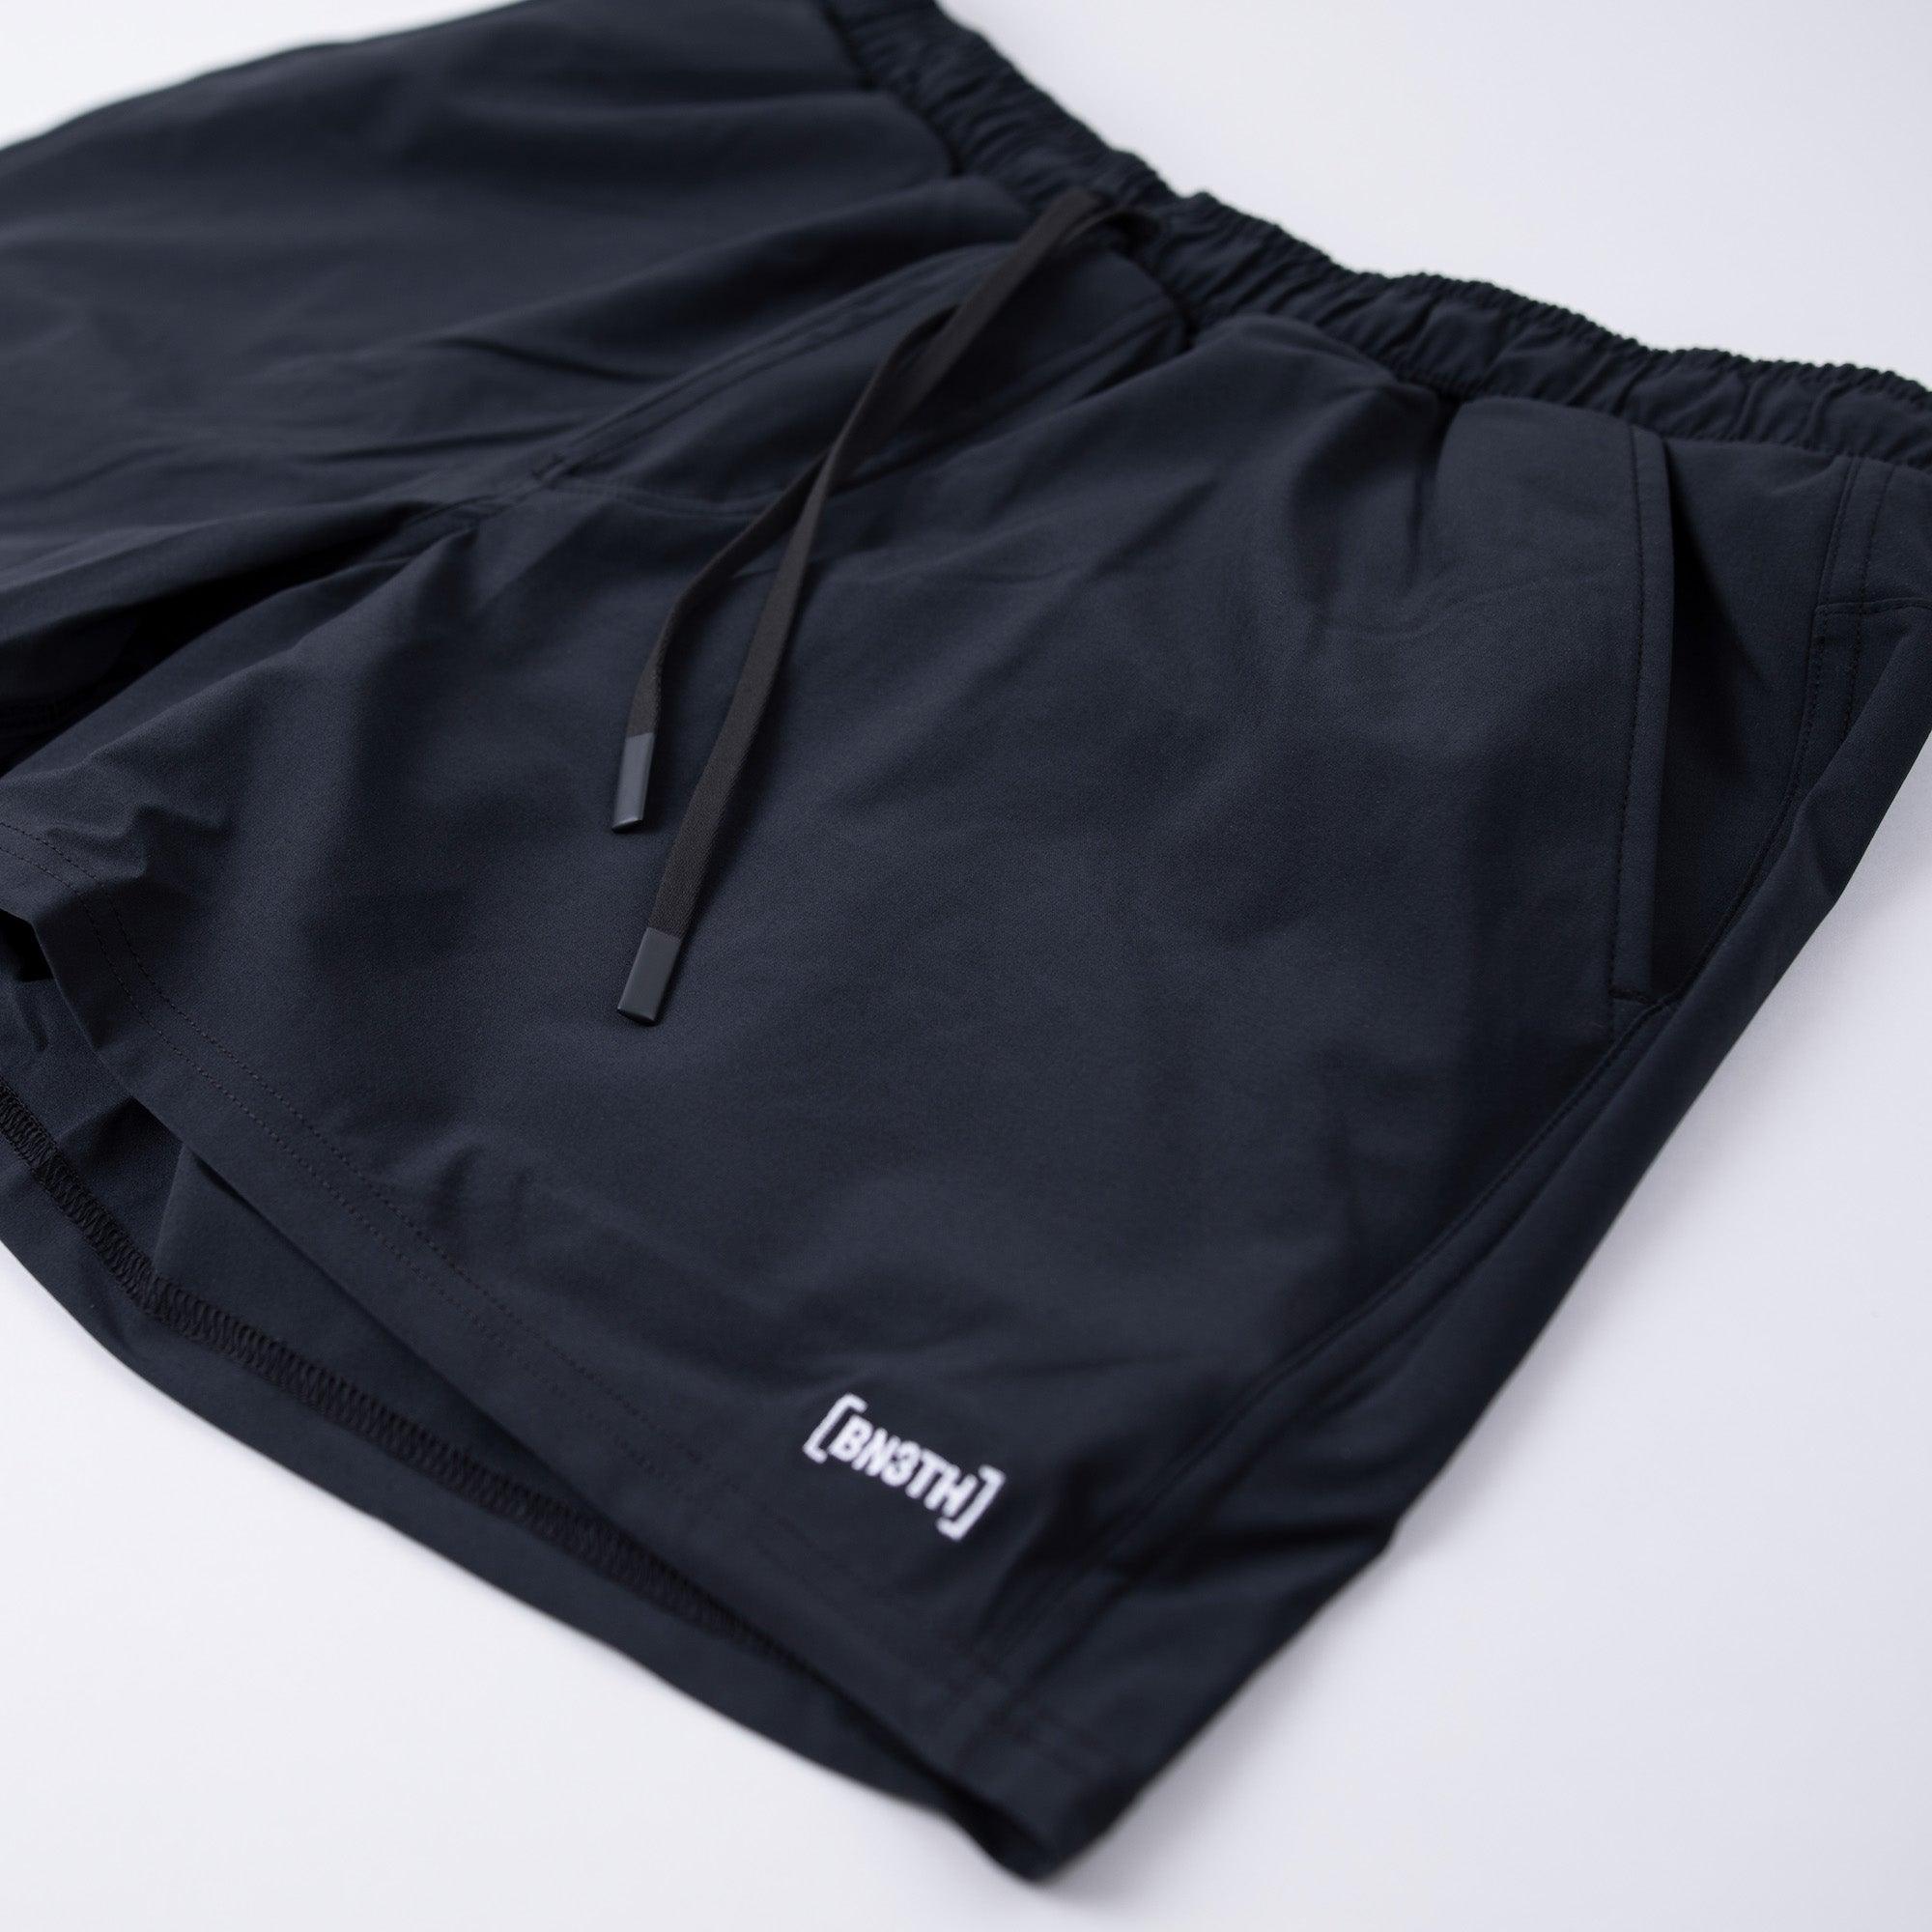 Image showing the BN3TH-M05020165-BLK -AGUA VOLLEY 2N1 SWIM SHORT 5"- BLACK which is a Others described by the following info Accessories, BN3TH, New, Others, Released and sold on the IRON HEART GERMANY online store